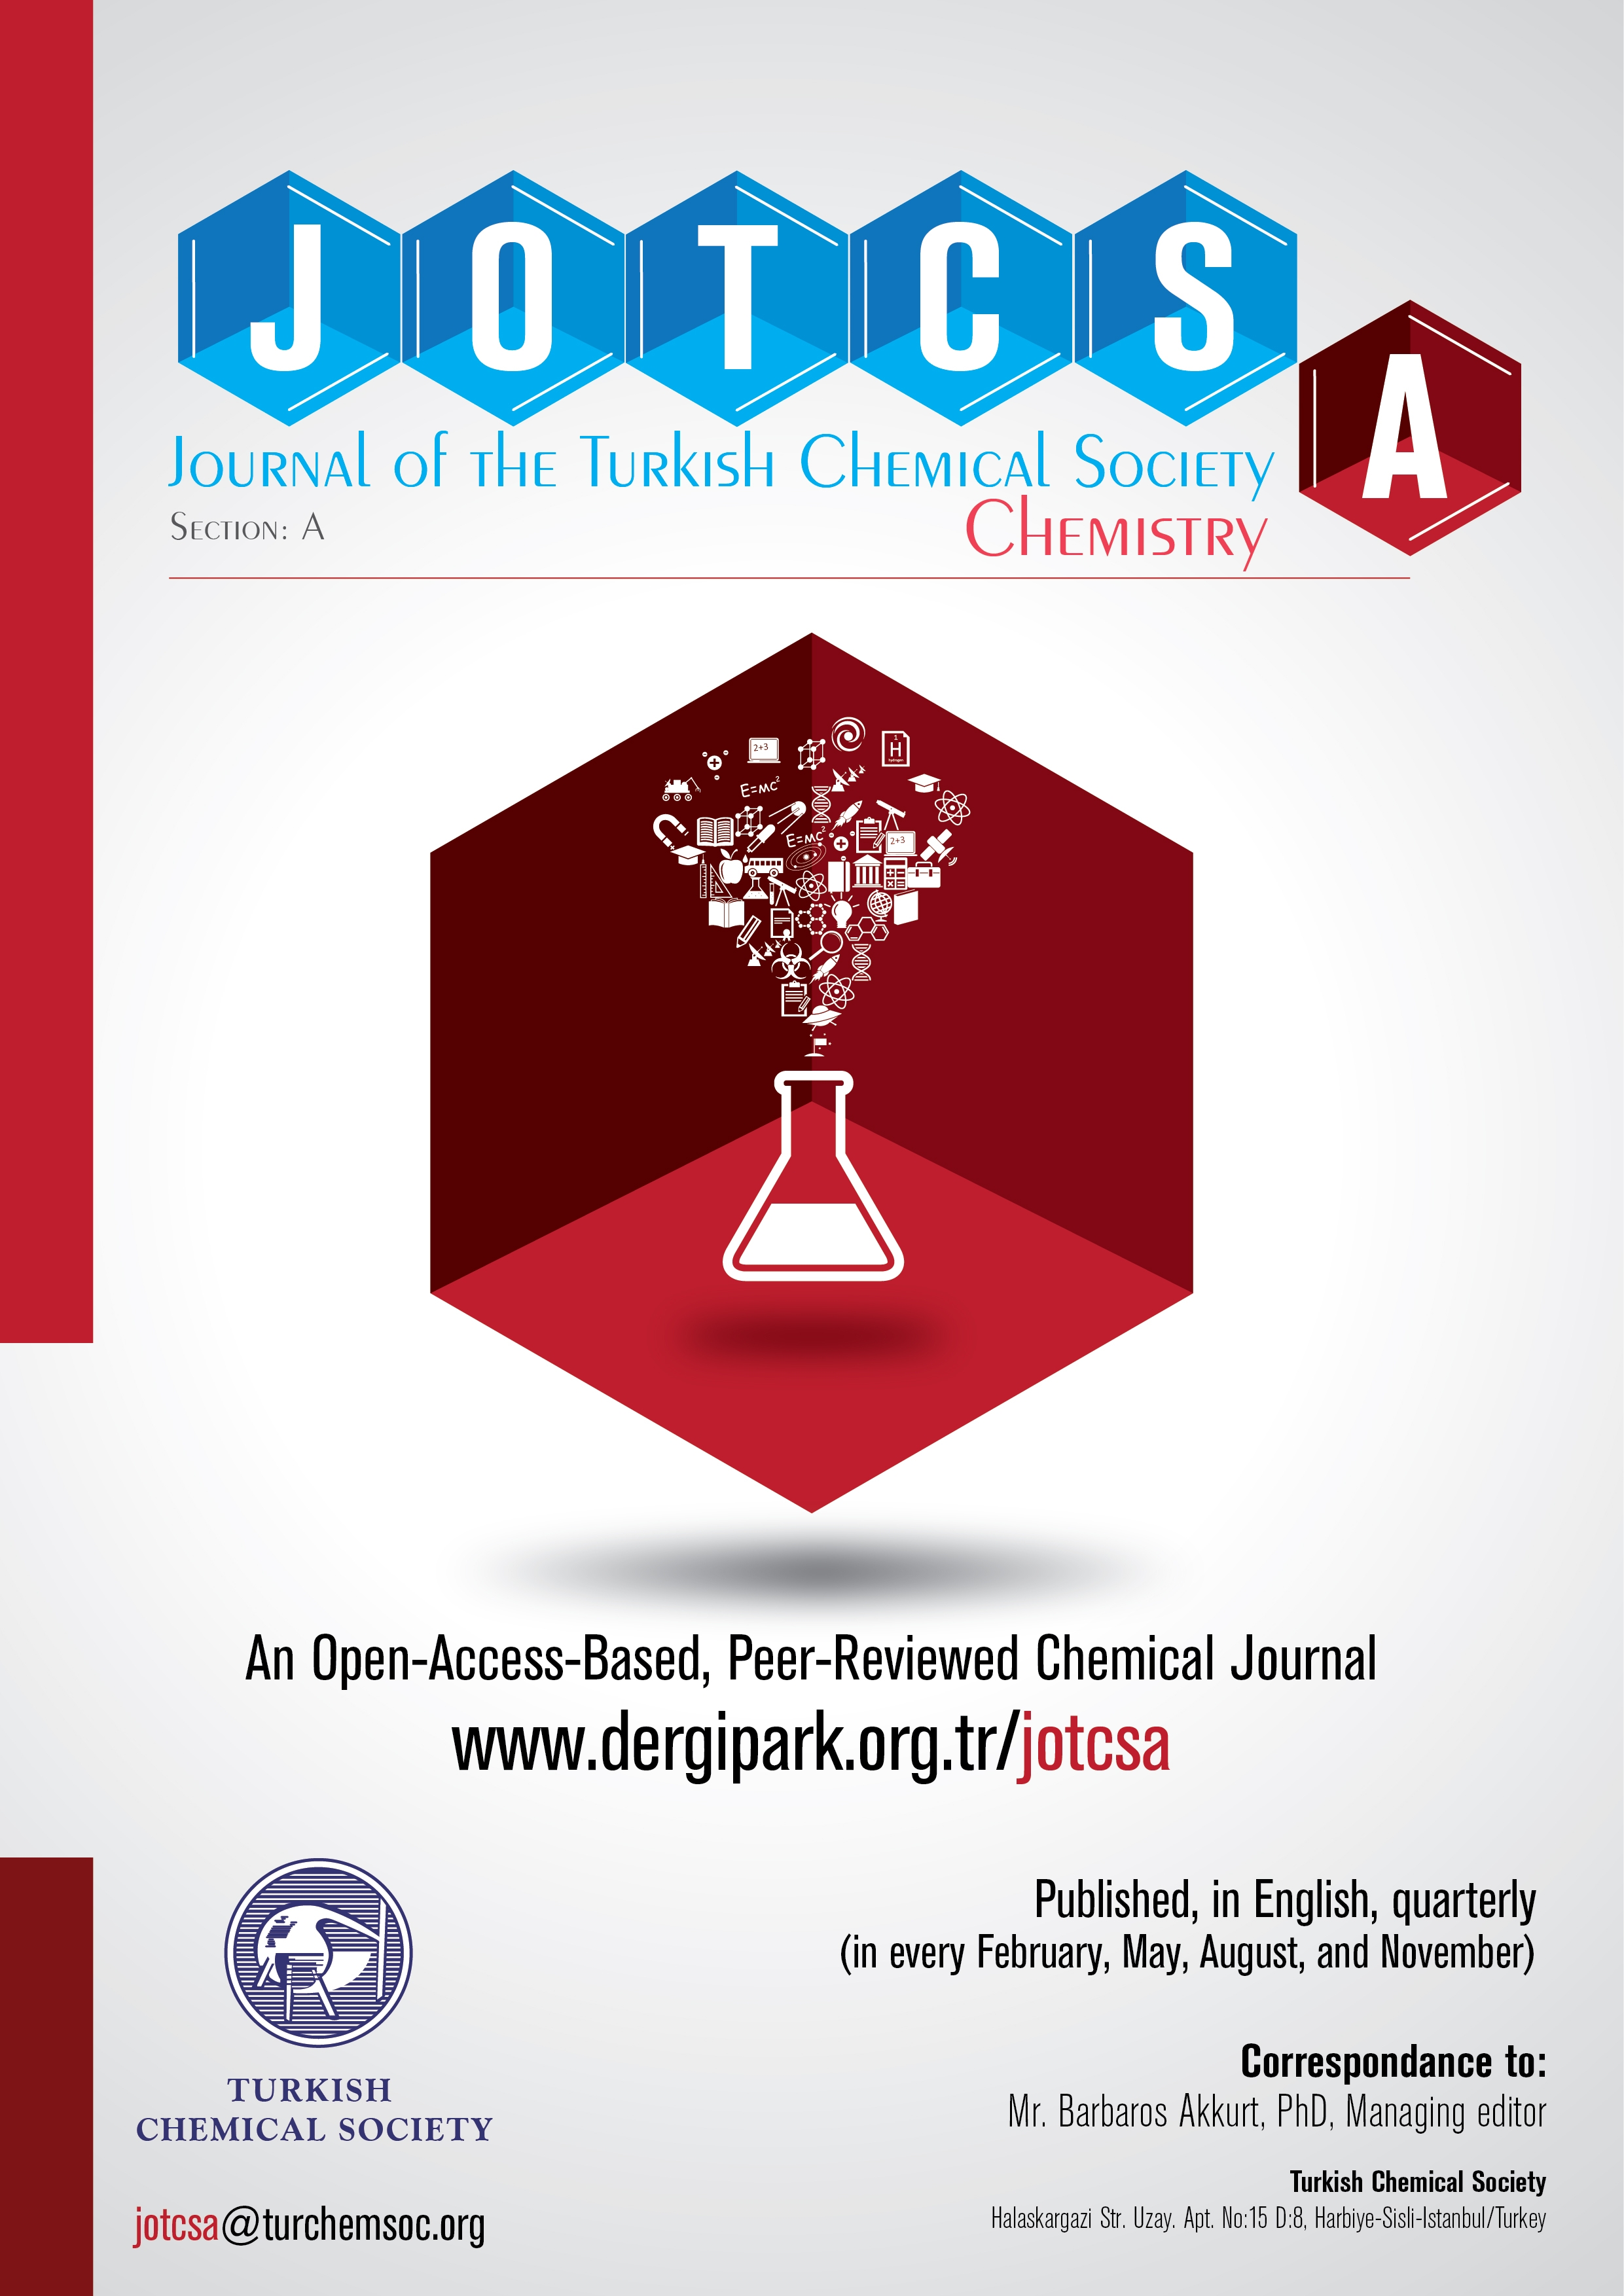 Journal of the Turkish Chemical Society. DERGIPARK.